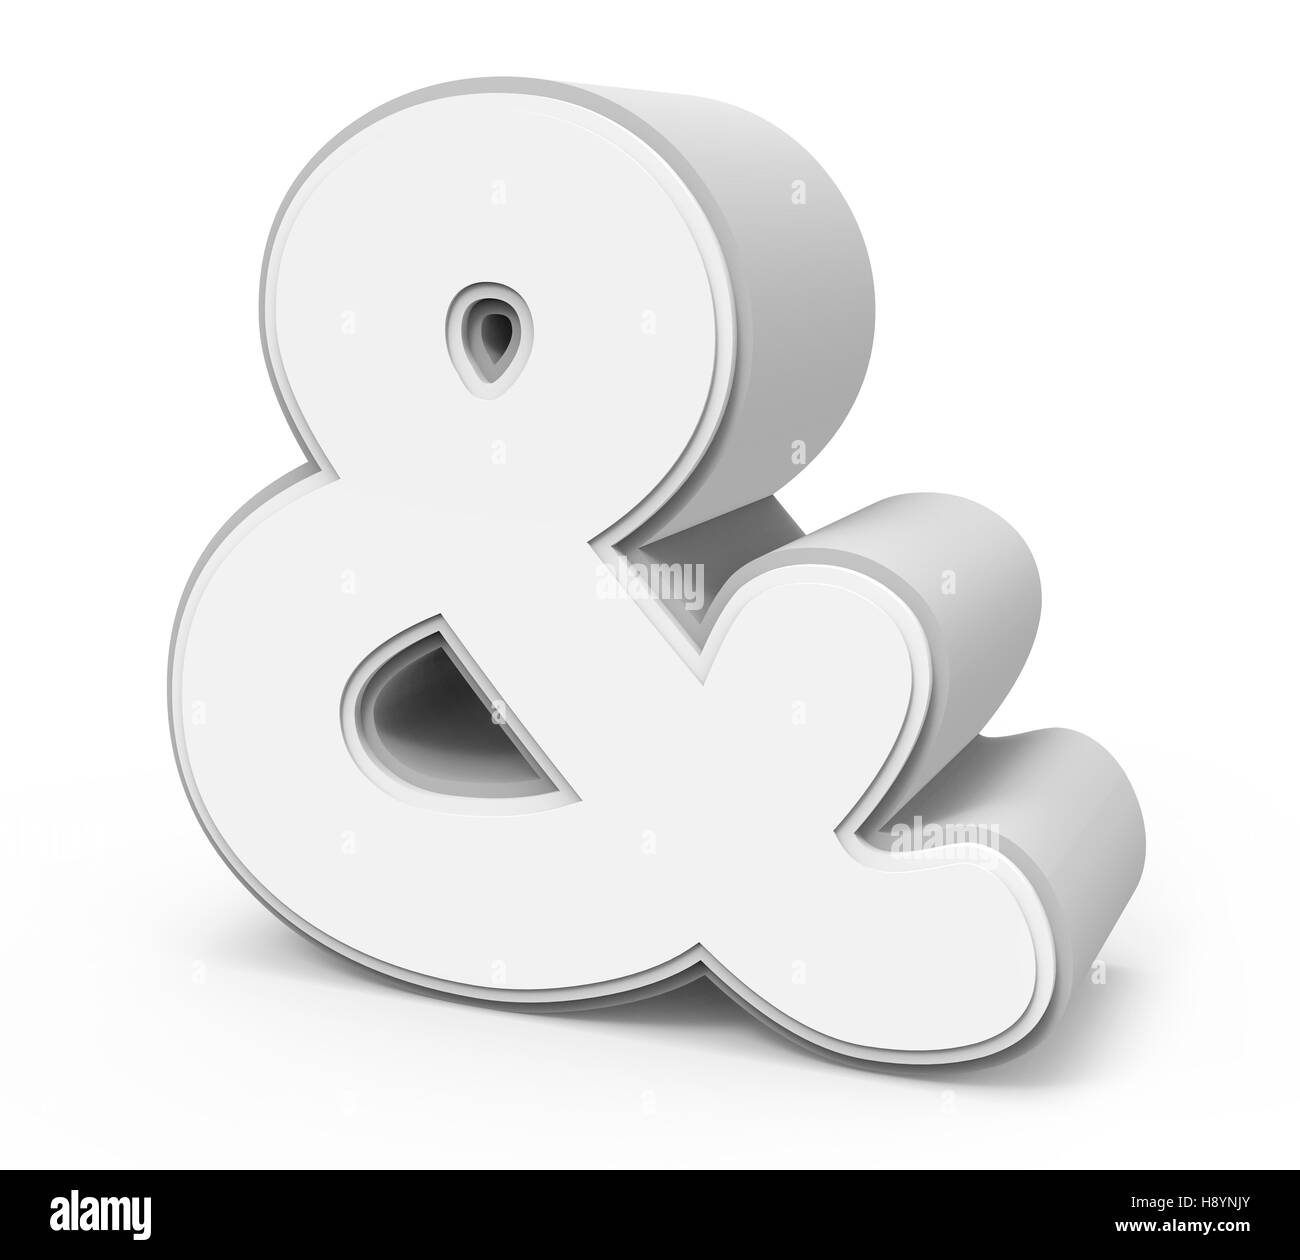 Ampersand Black and White Stock Photos & Images - Alamy